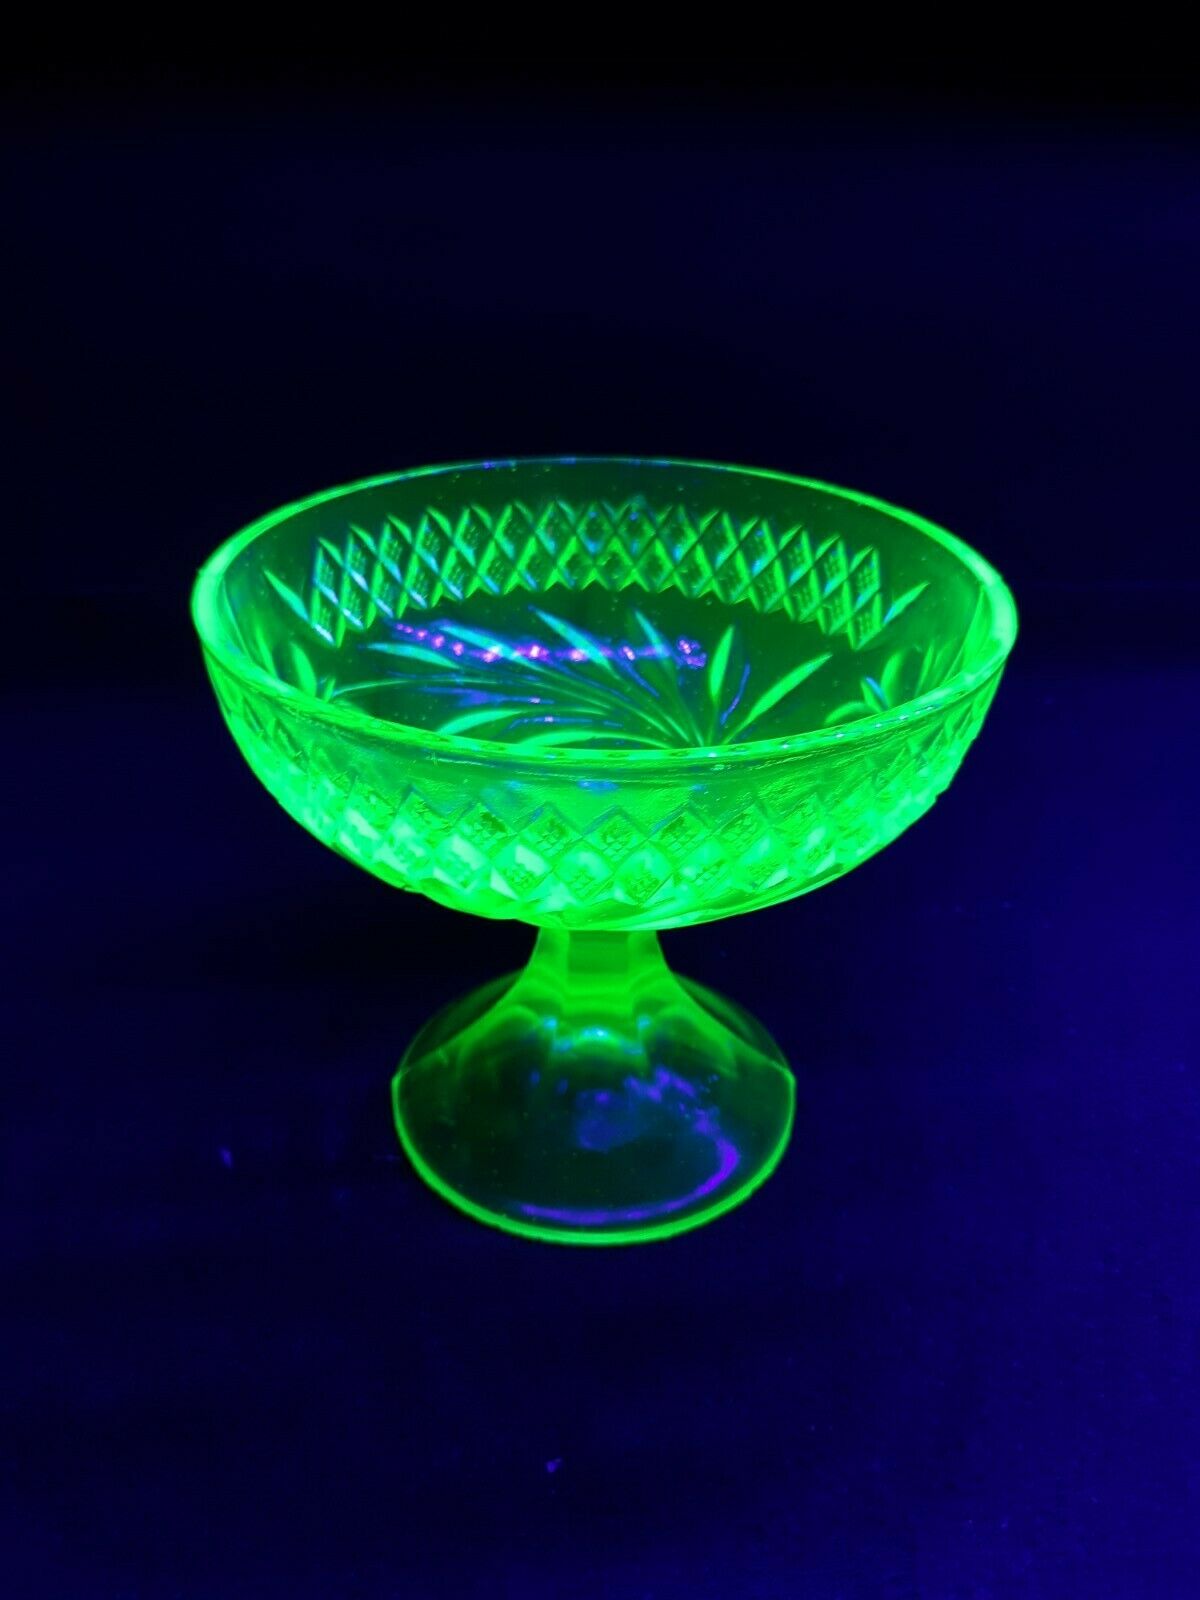 Green Floral & Diamond Band Footed Compote, Uranium Depression Glass